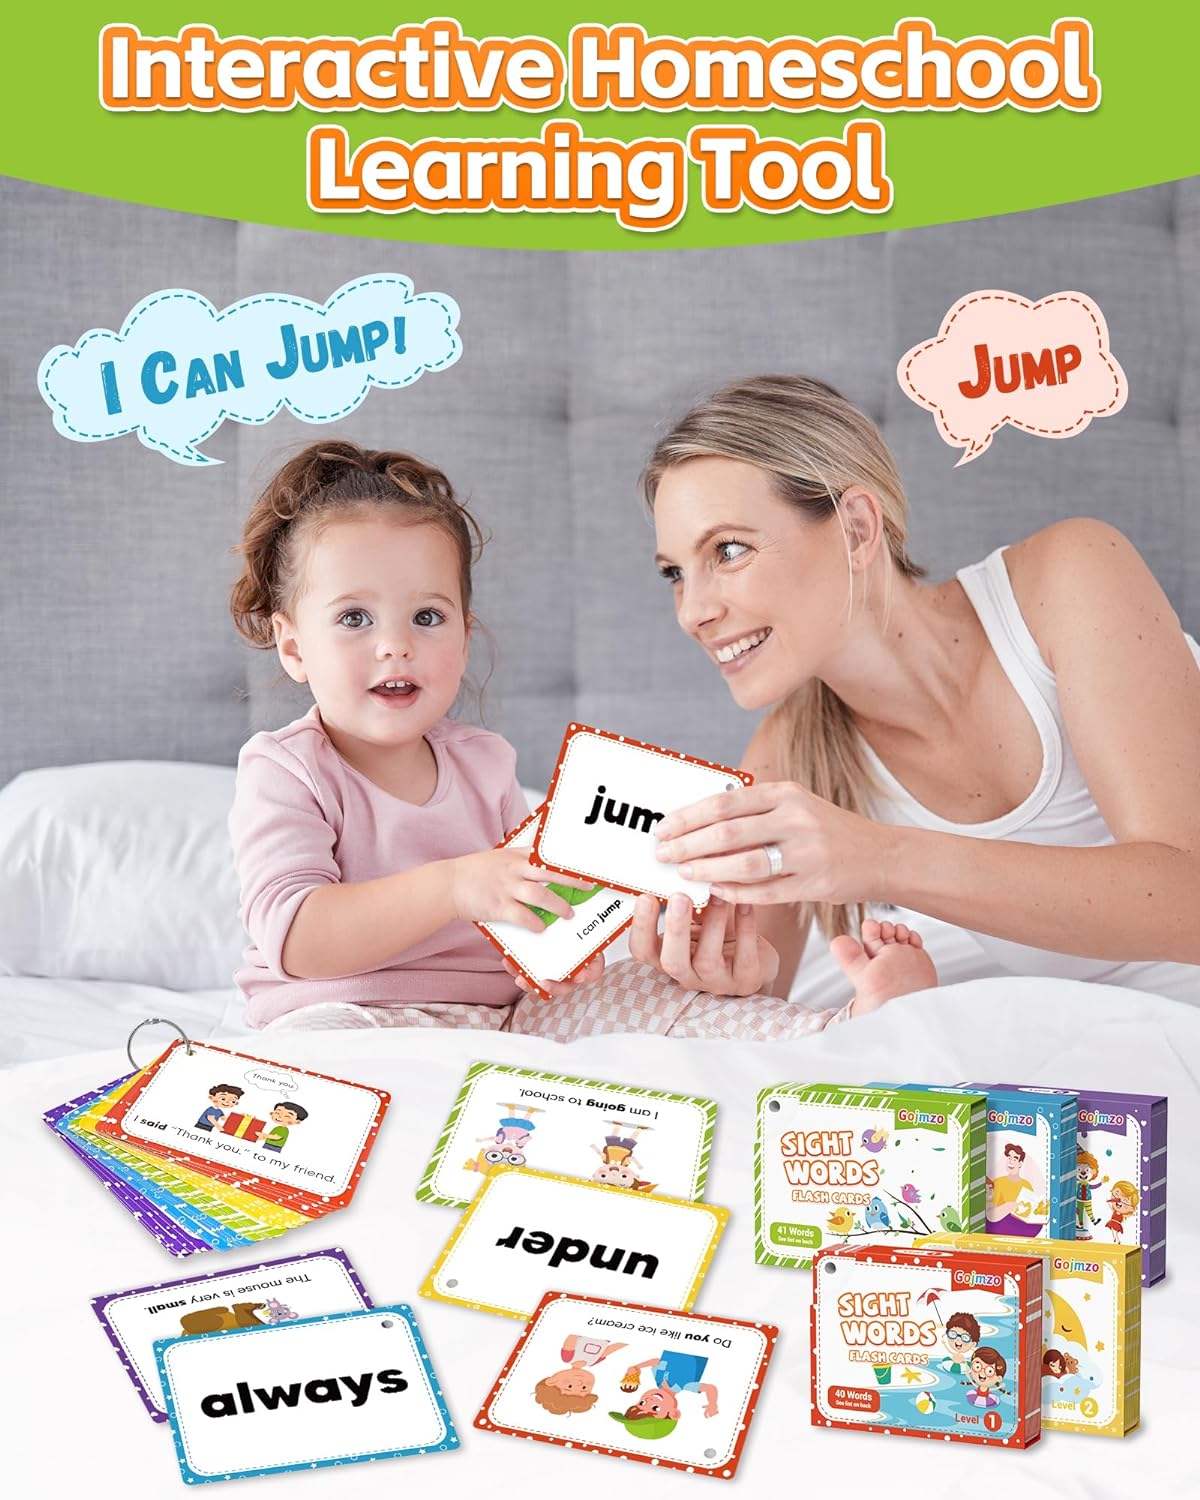 Gojmzo Sight Words Flash Cards Kindergarten Preschool Learning Activities, Homeschool Supplies for Kids Ages 4-8, 220 Dolch Sight Word Reading Spelling Games Learning Toys for 3 4 5 Year Old Toddlers